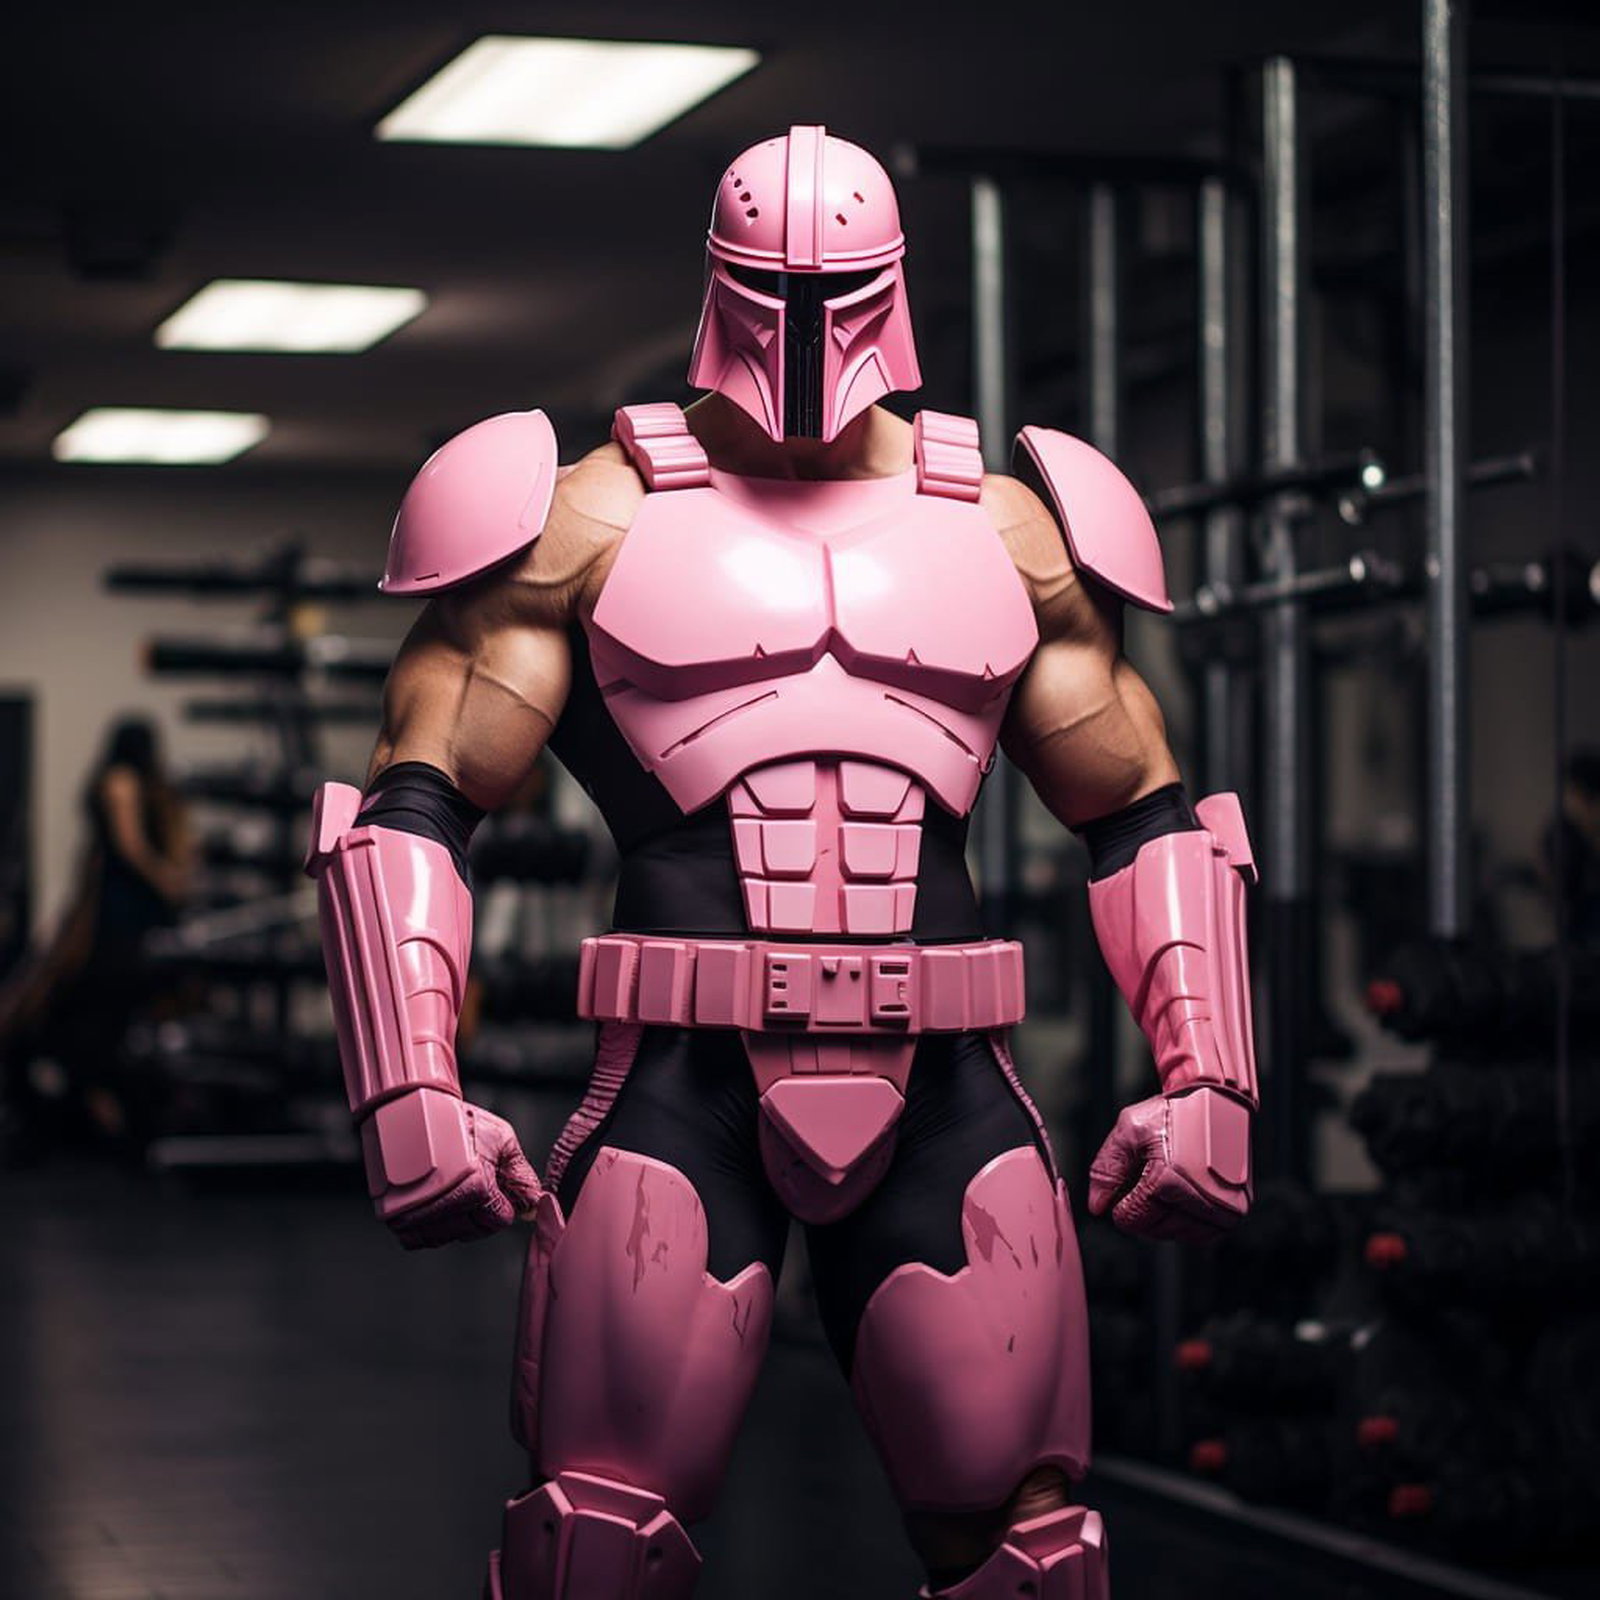 Watch the Photo by DirtyDaddyFunStuff with the username @DirtyDaddyPorn, who is a verified user, posted on January 9, 2024 and the text says 'Wicked #art 11 #starwars #wakanda #muscles #aquaman'